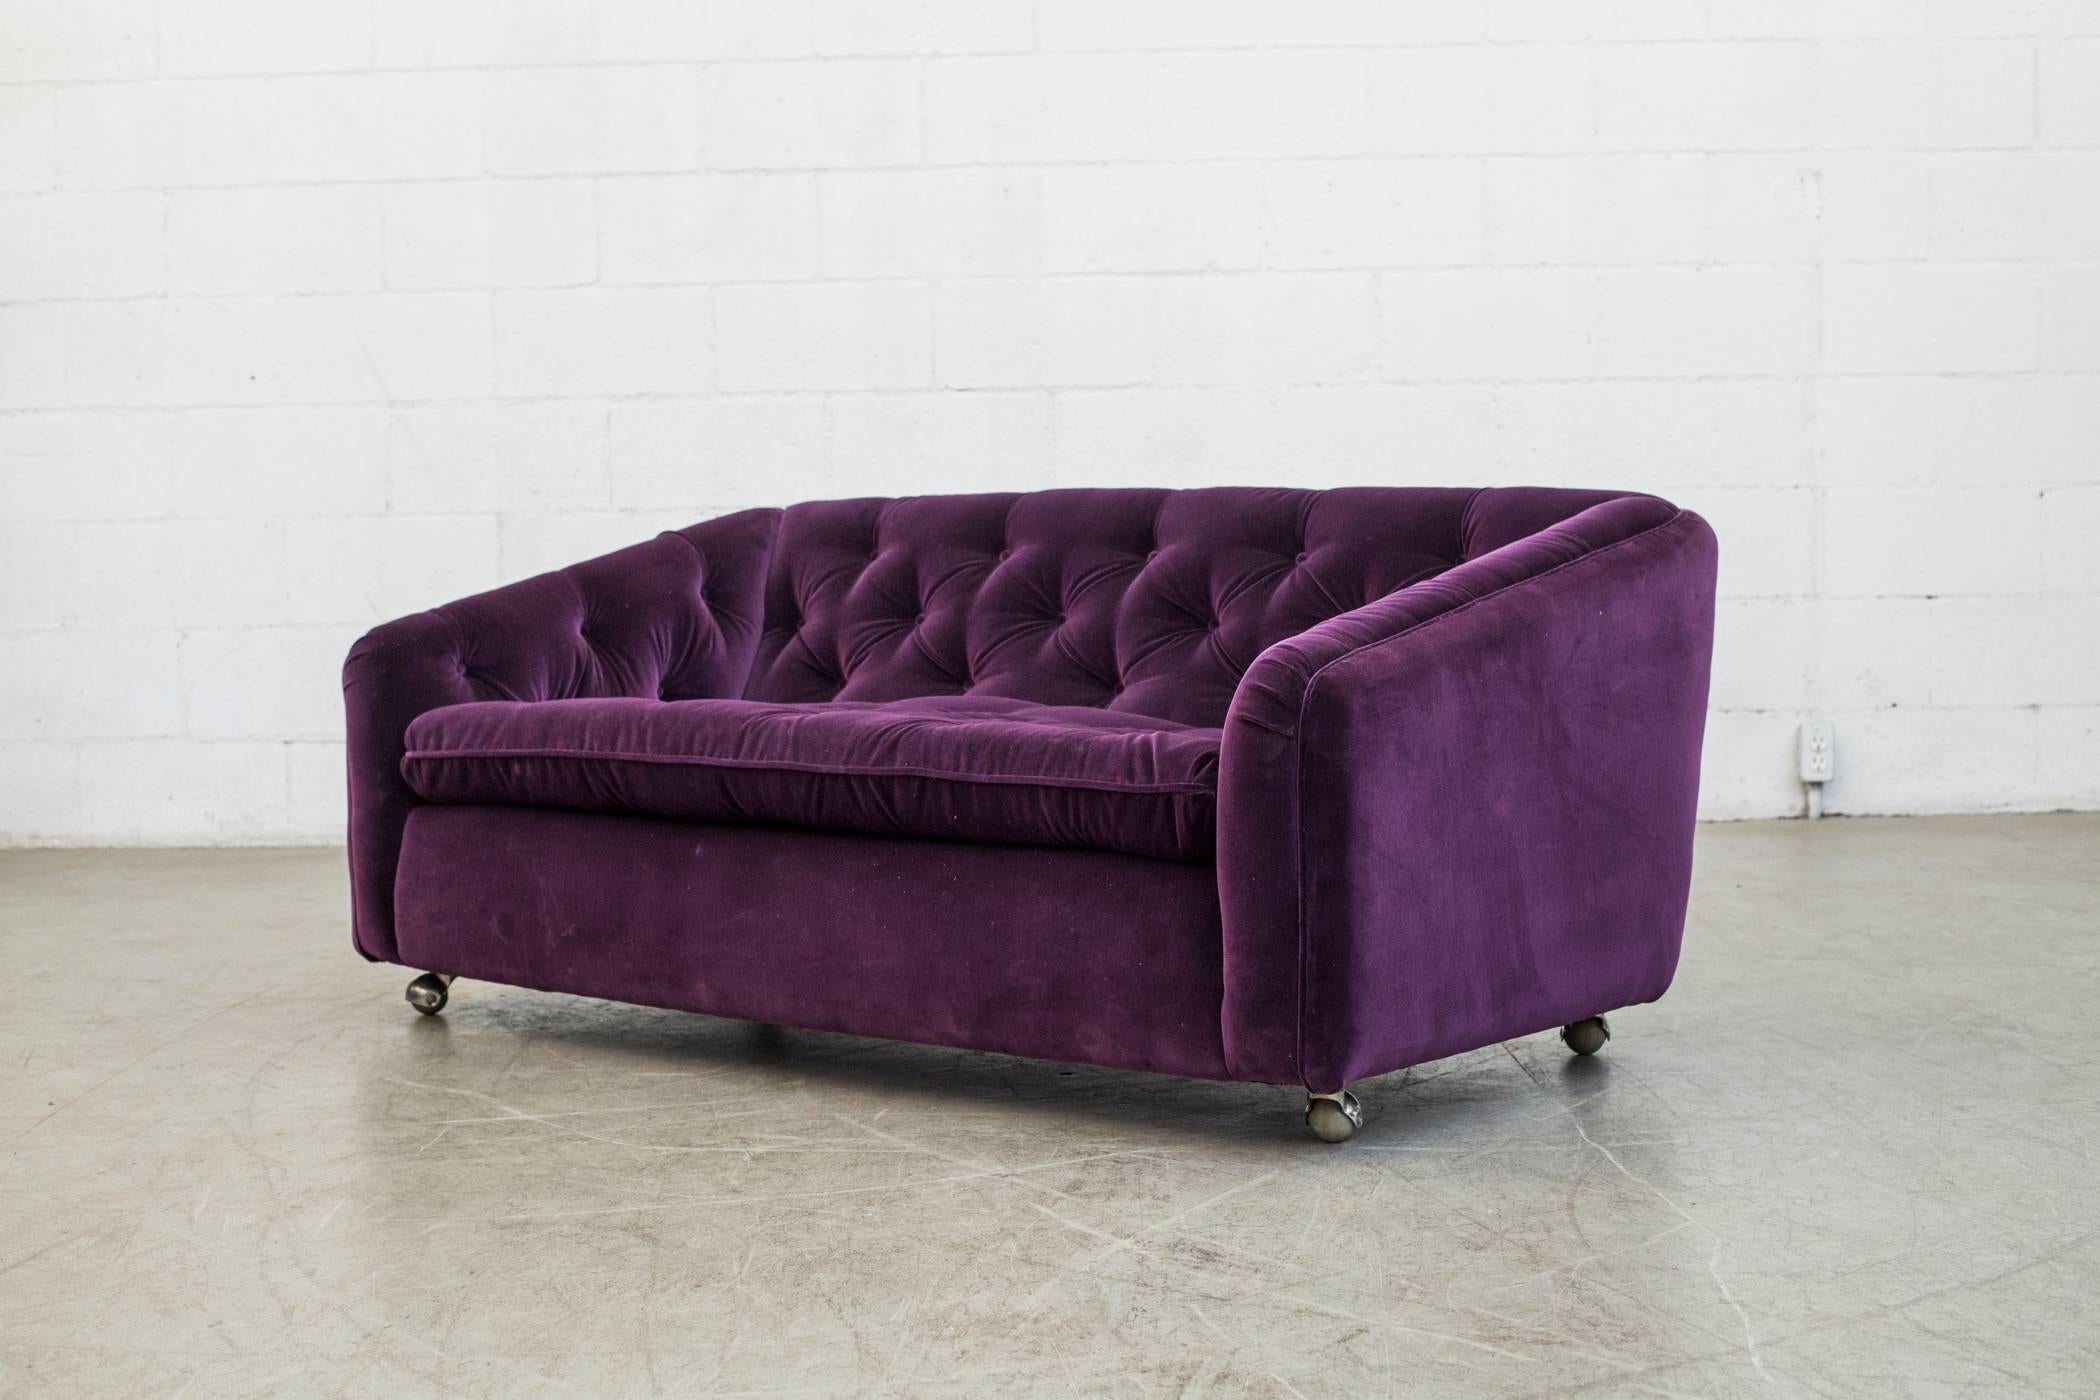 Amazing two-seat Artifort tufted sofa by Geoffrey Harcourt newly upholstered in amethyst velvet sofa on rollers. Matching tufted lounge chair available, listed separately.